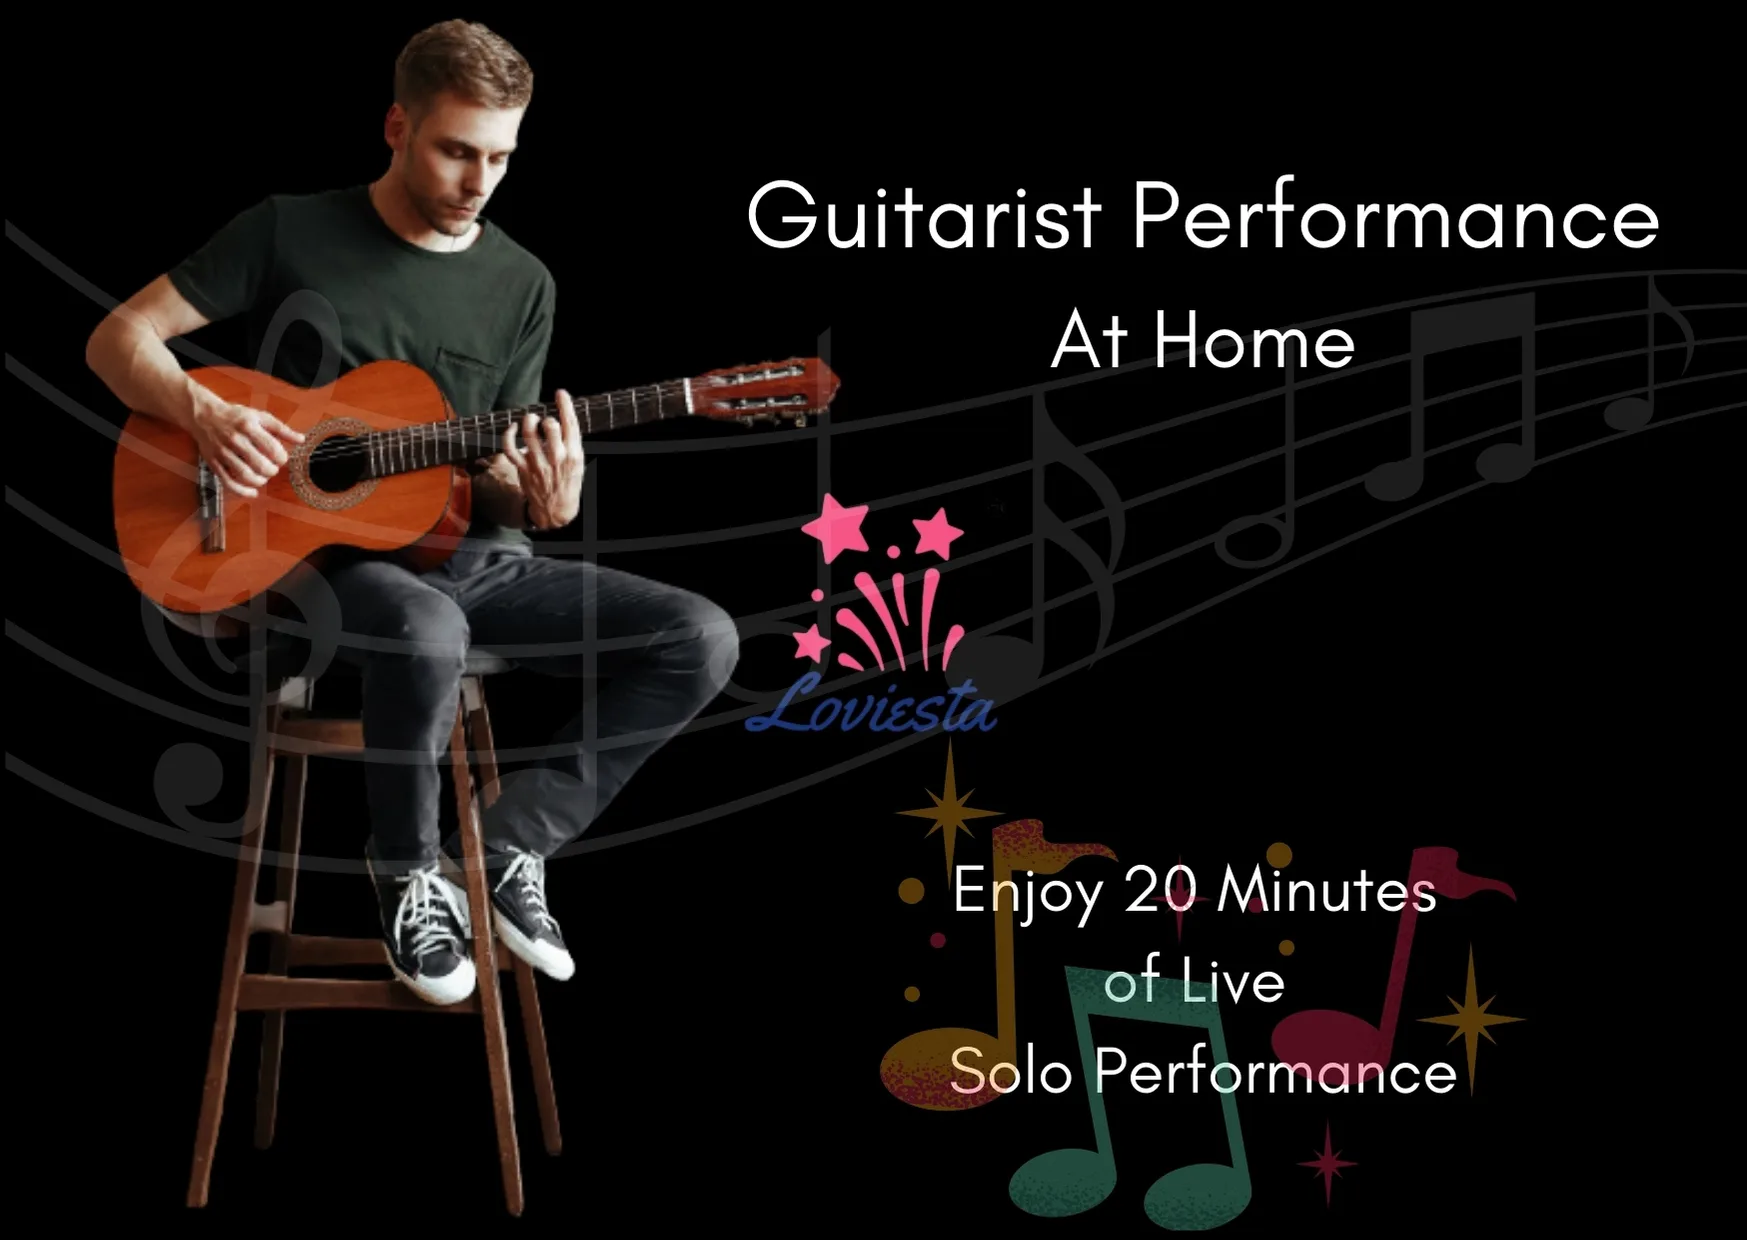 Guitarist Performance At Home